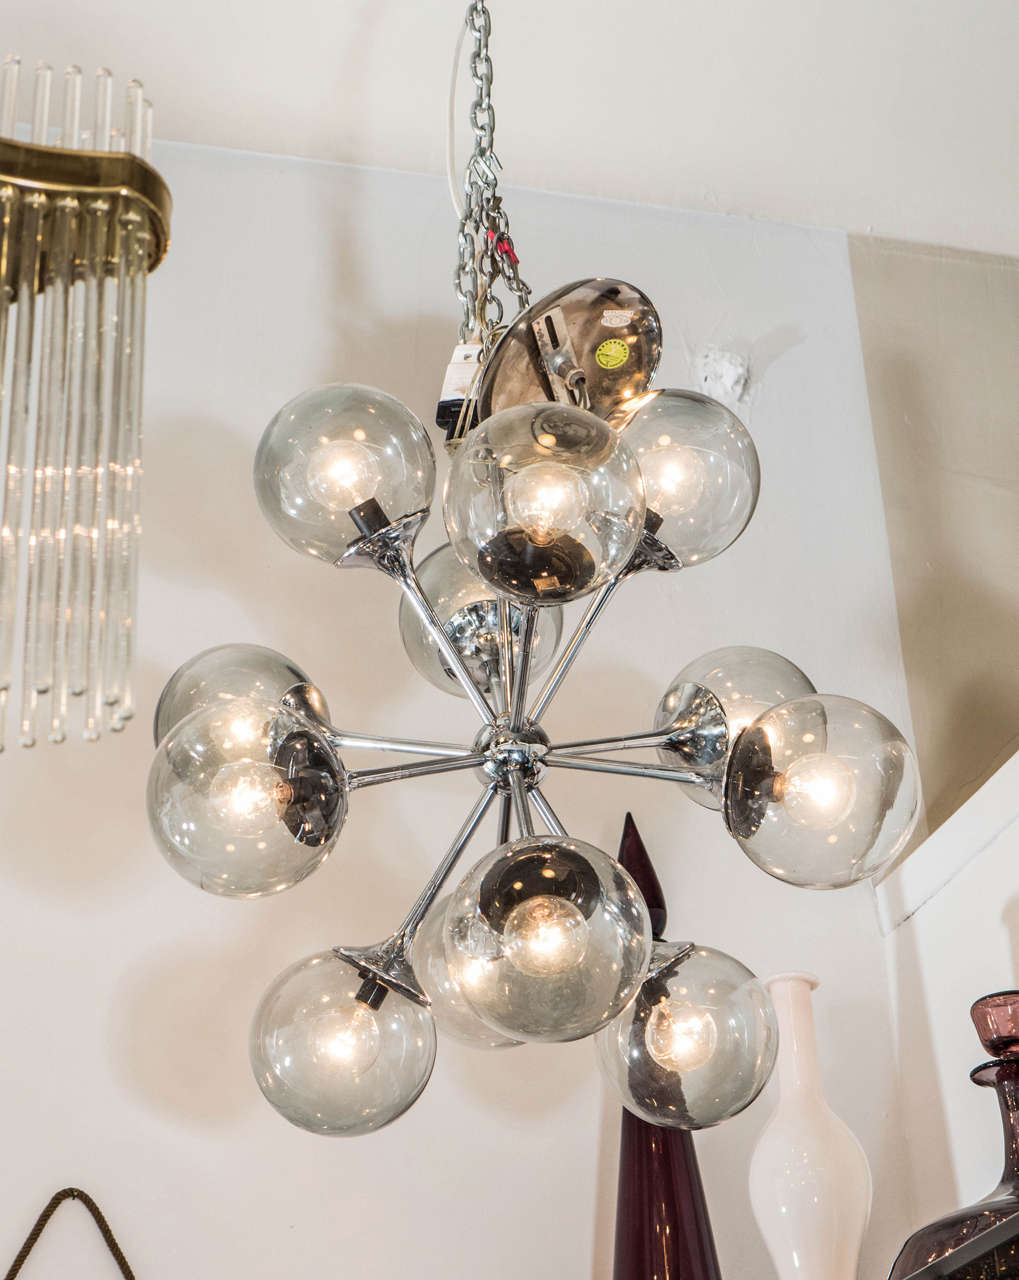 A vintage Sputnik 12-arm chandelier with bubble shaped smoked glass globes on a chrome frame by Lightolier.